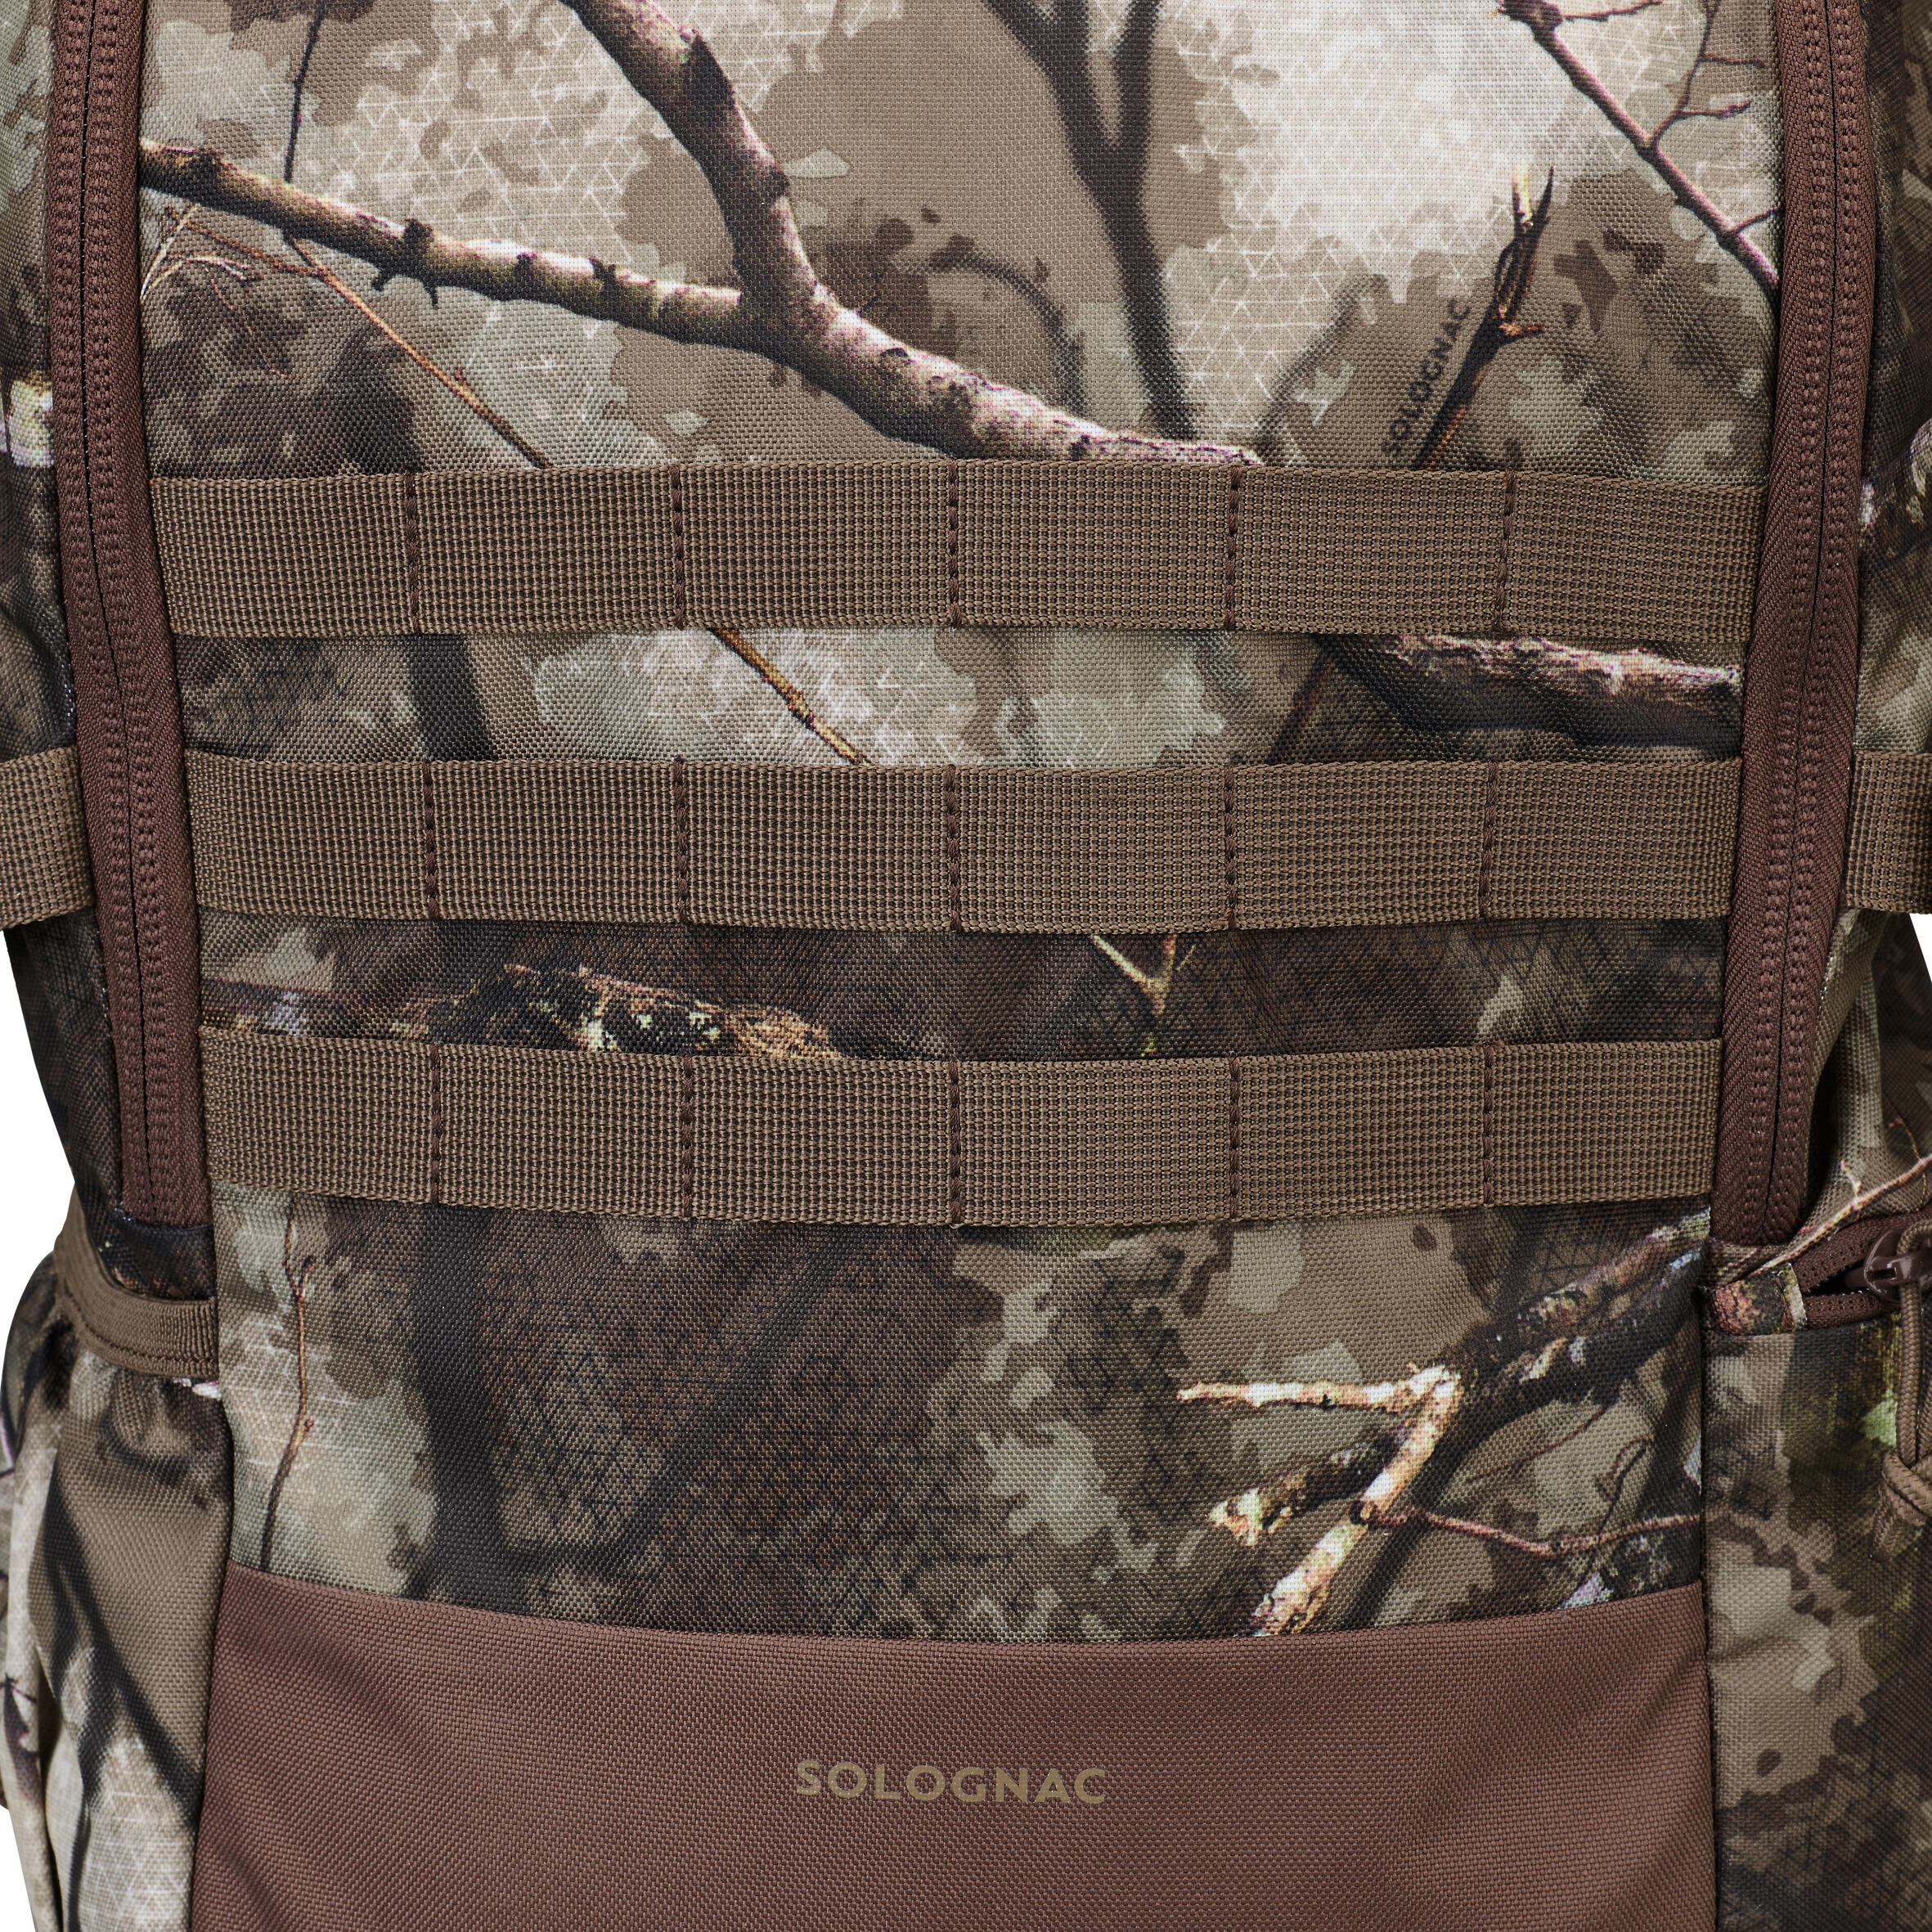 X-Access Compact Country Sport Backpack 45 Litre Treemetic Camouflage 7/11